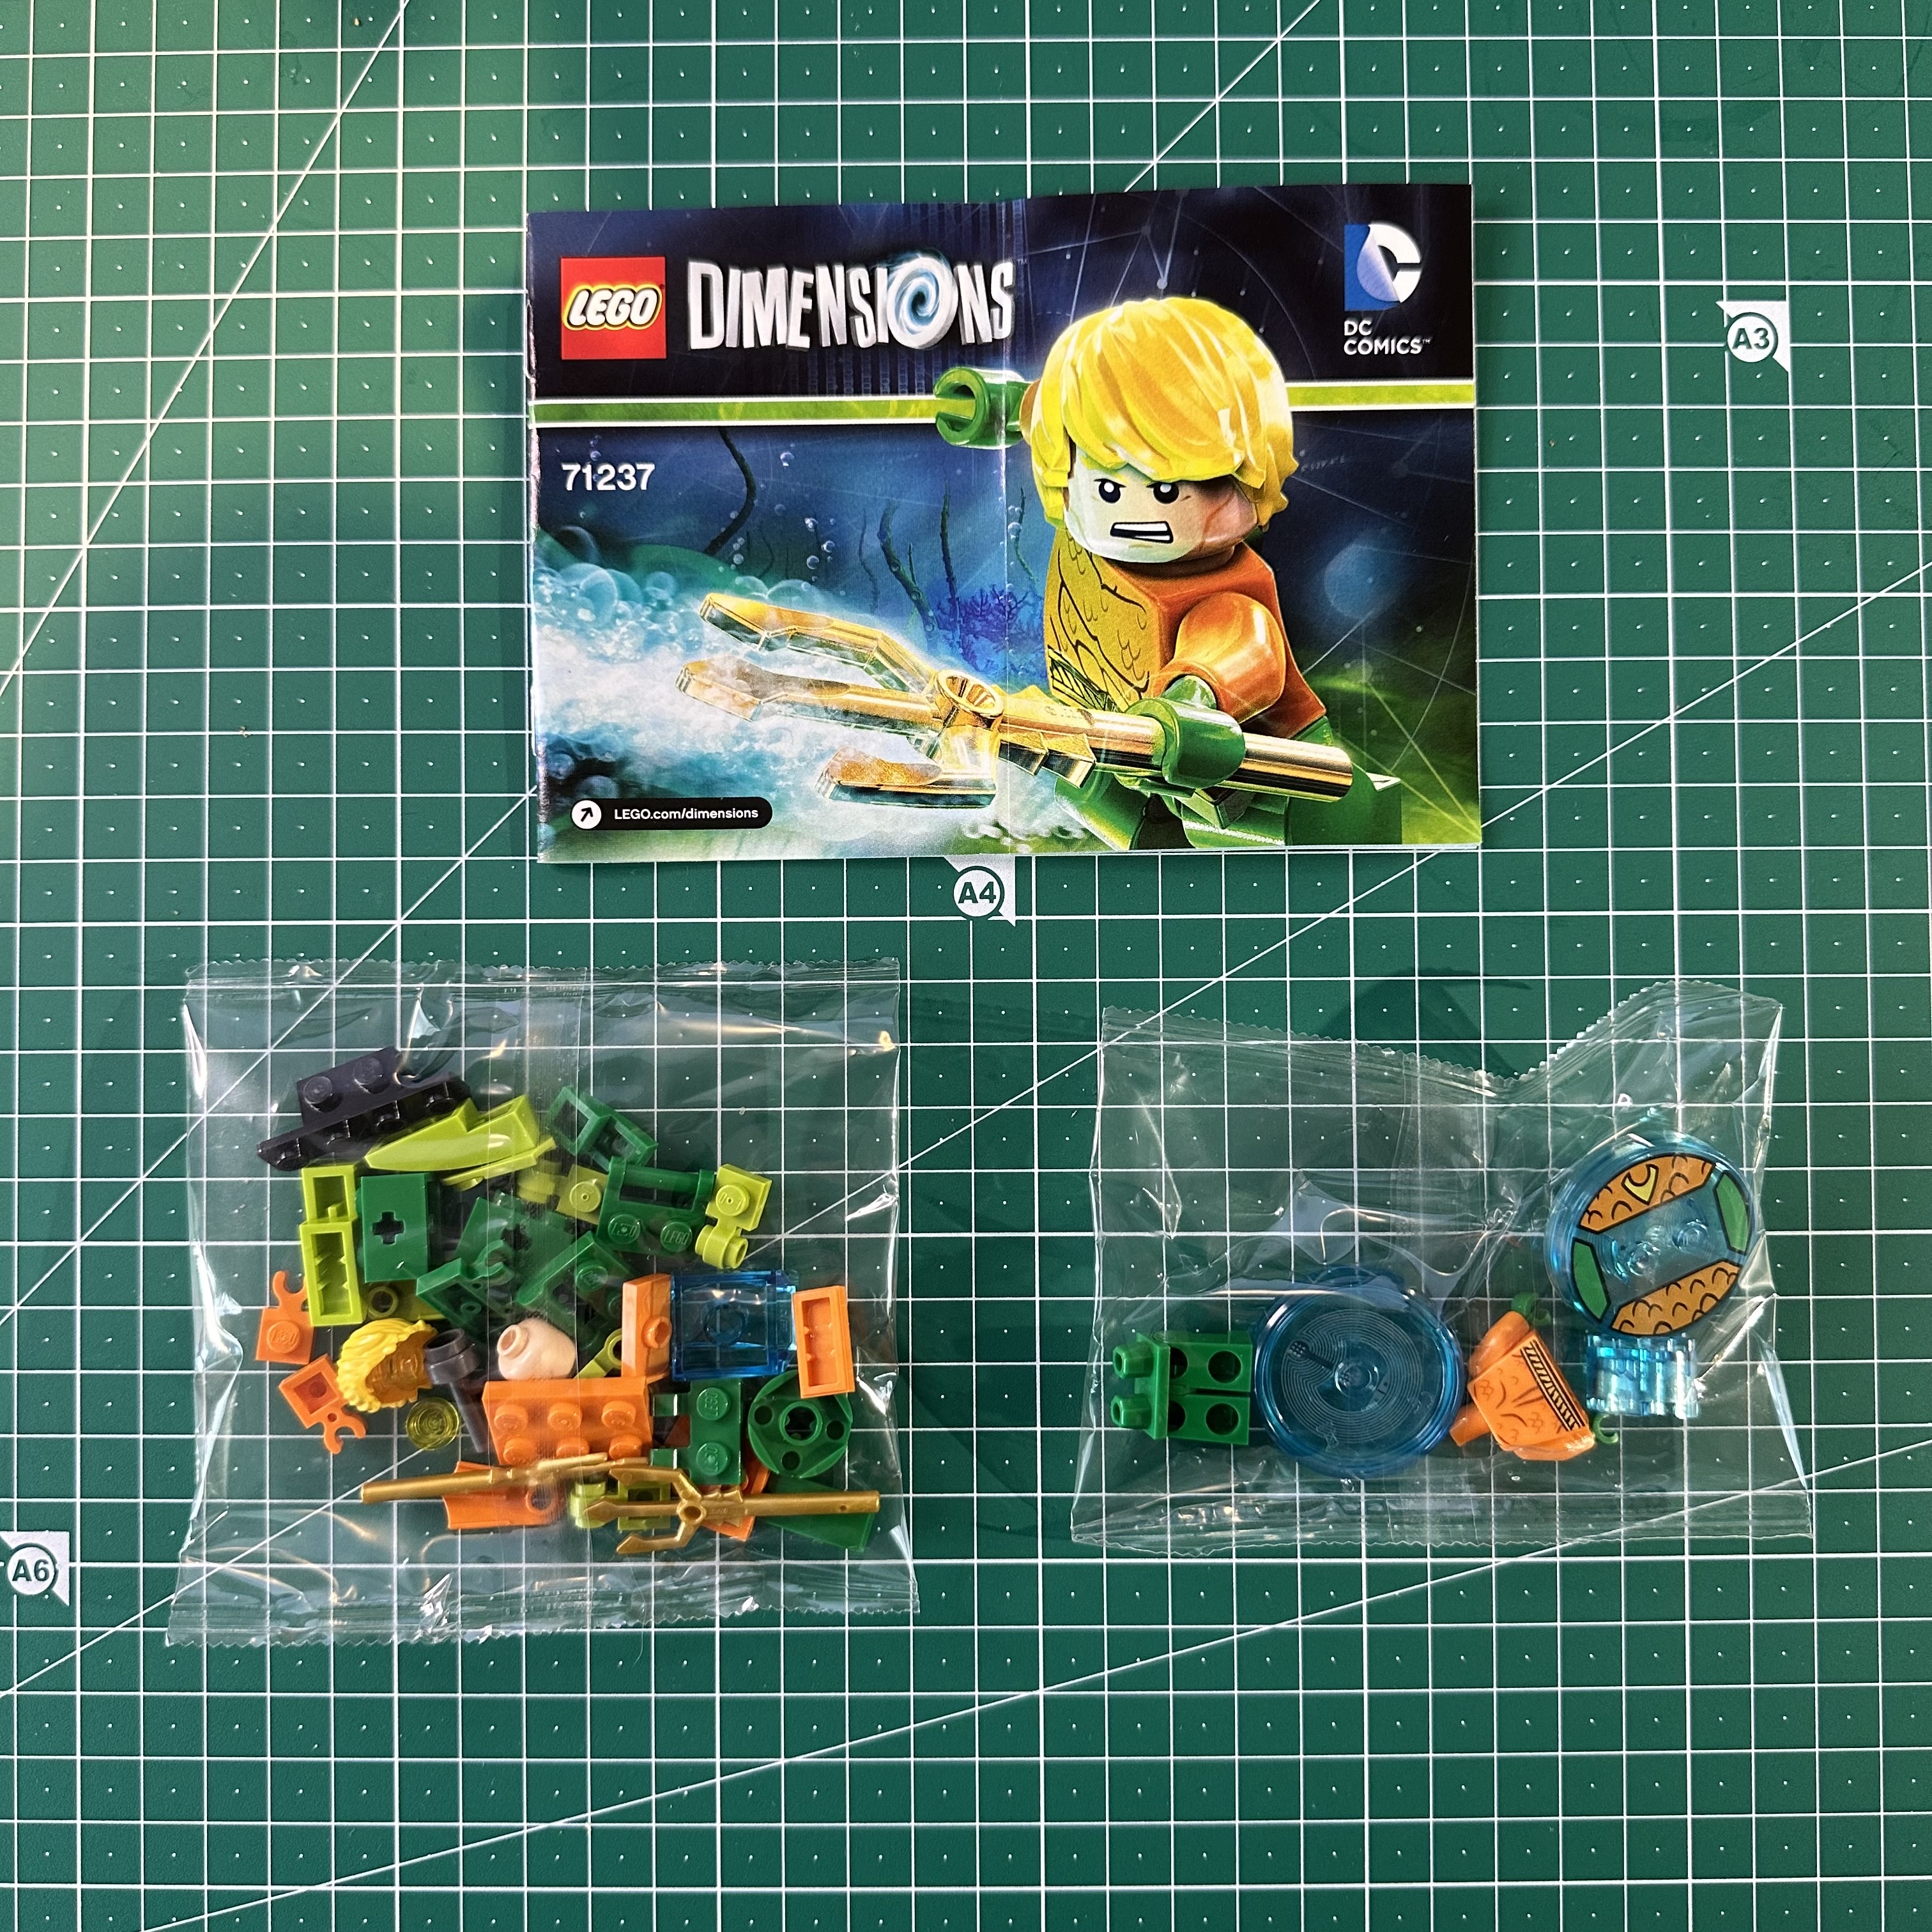 Instruction manual and two bags of LEGO pieces for LEGO Dimensions set 71237 Aquaman Fun Pack.